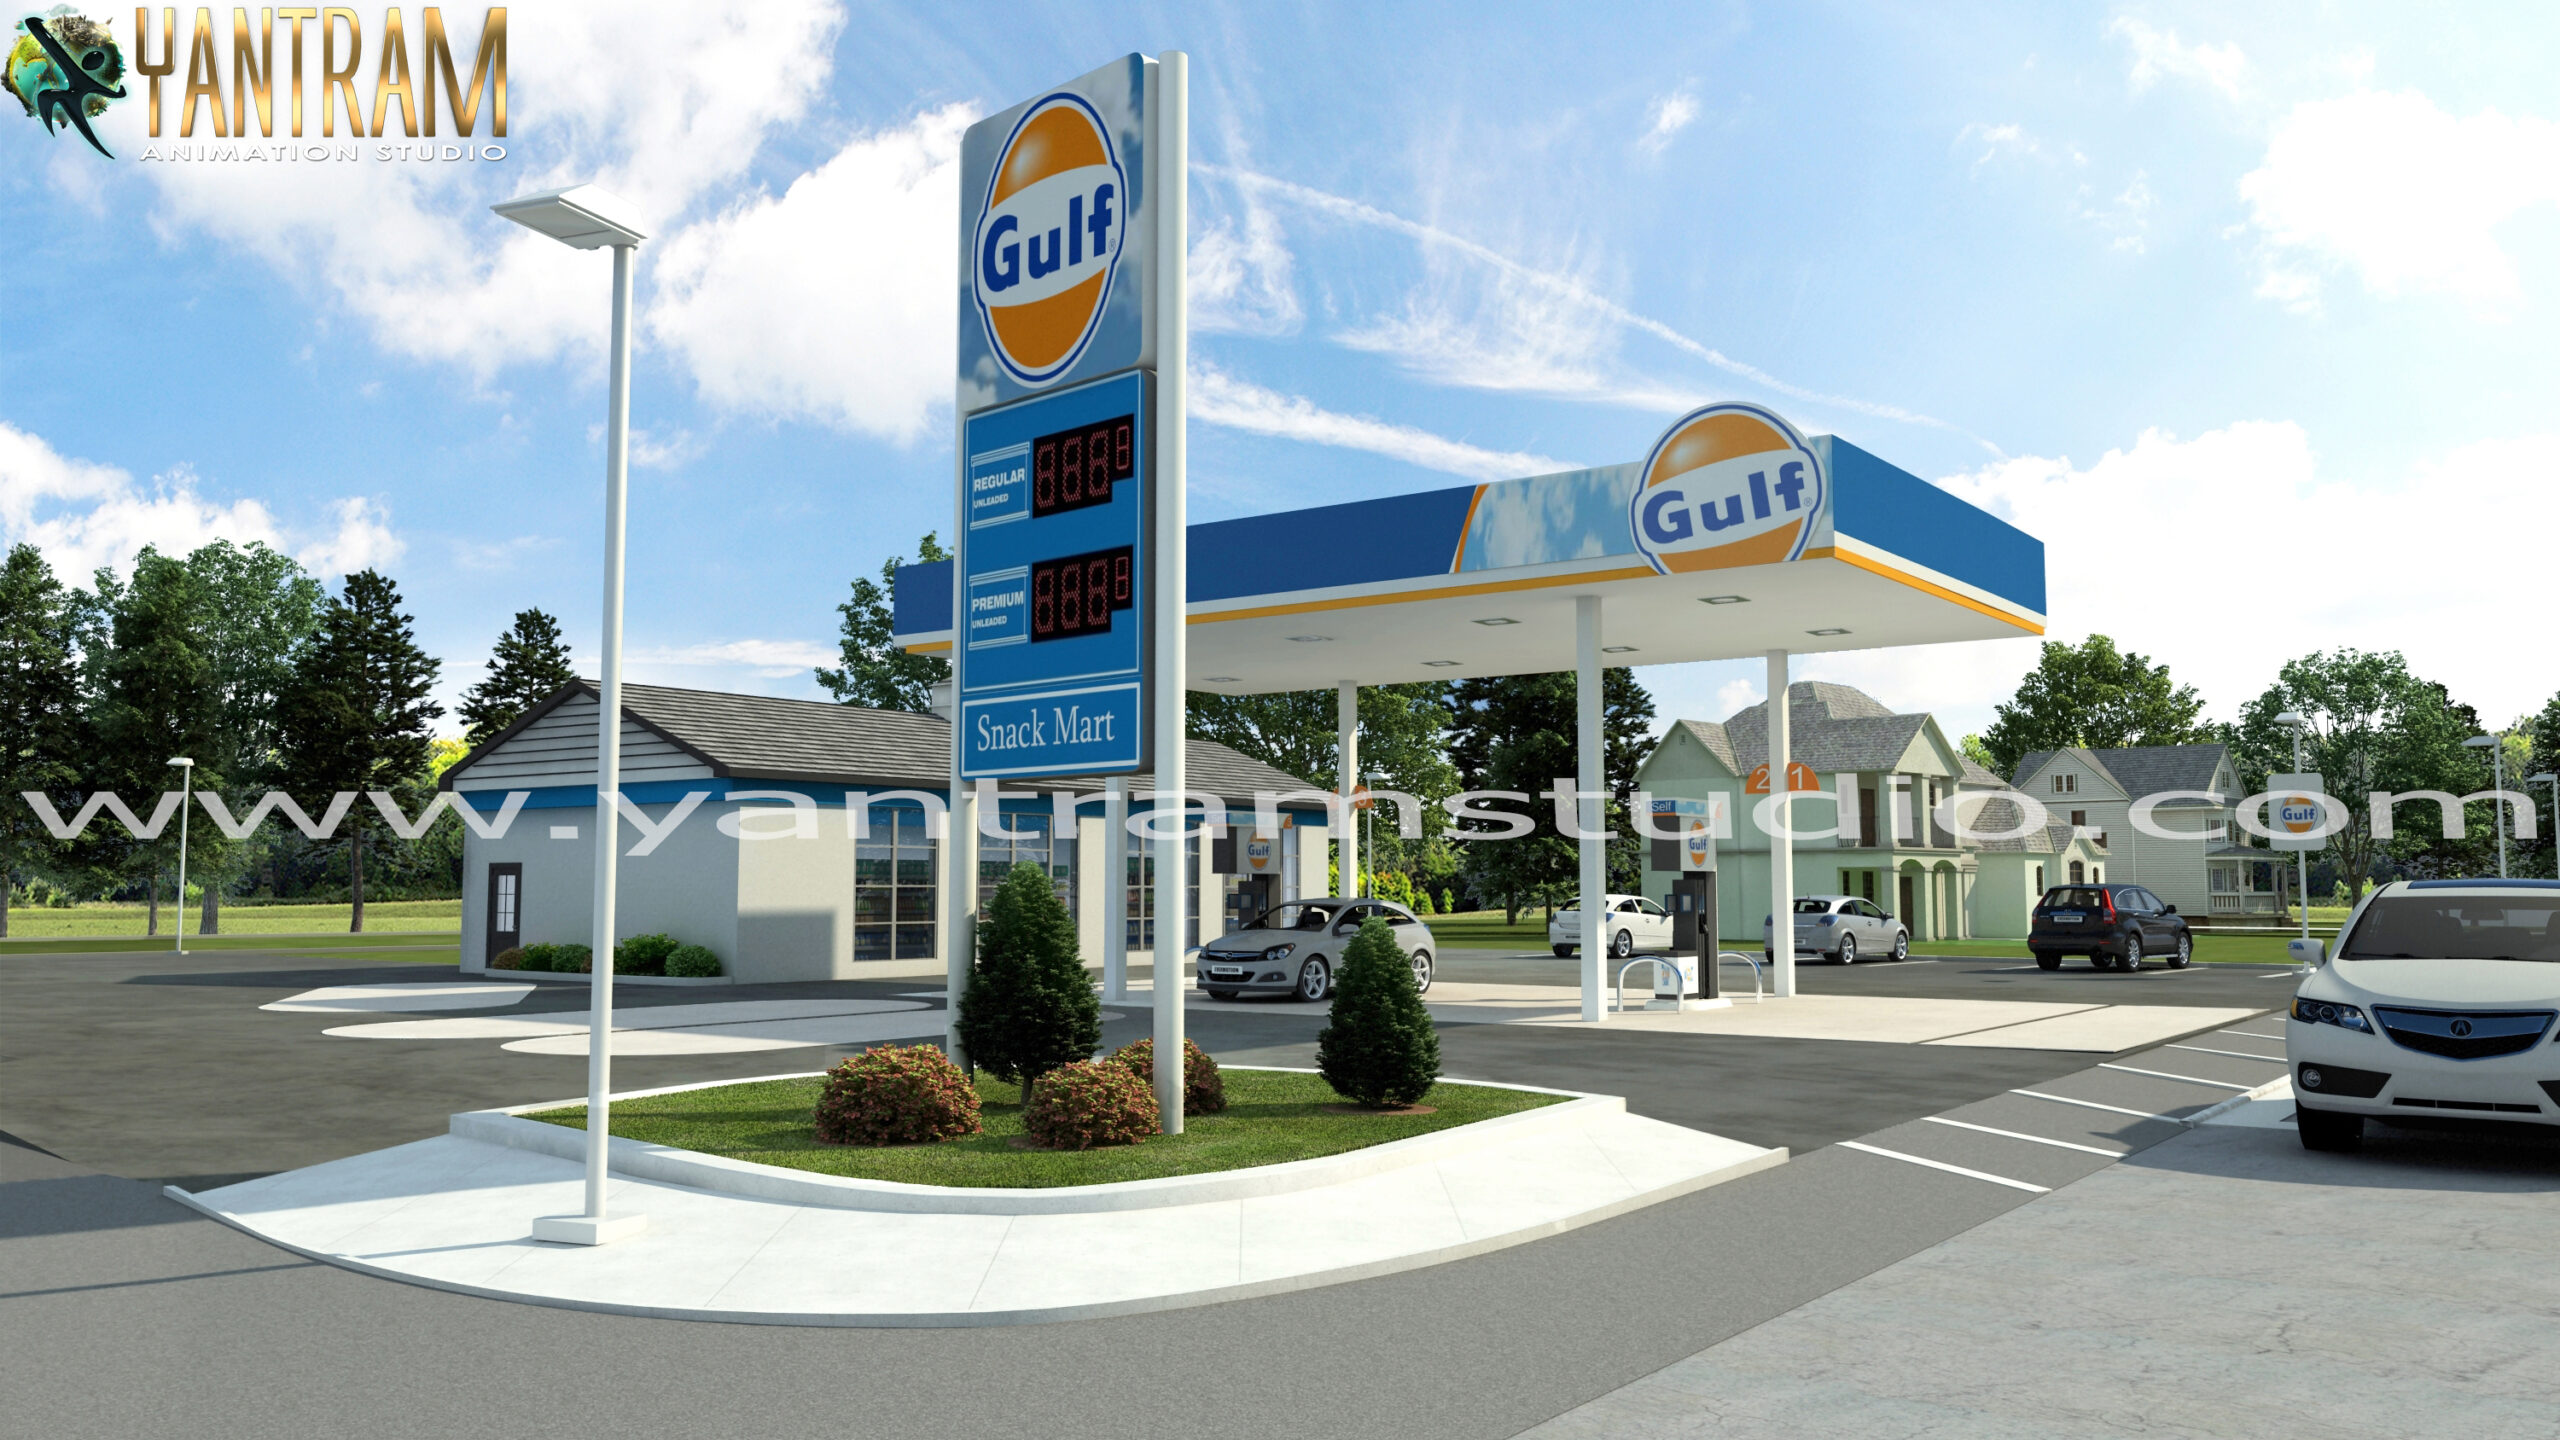 Architectural Rendering Services to Gulf Gas Station & Car by Yantram architectural rendering studio, Dallas, USA